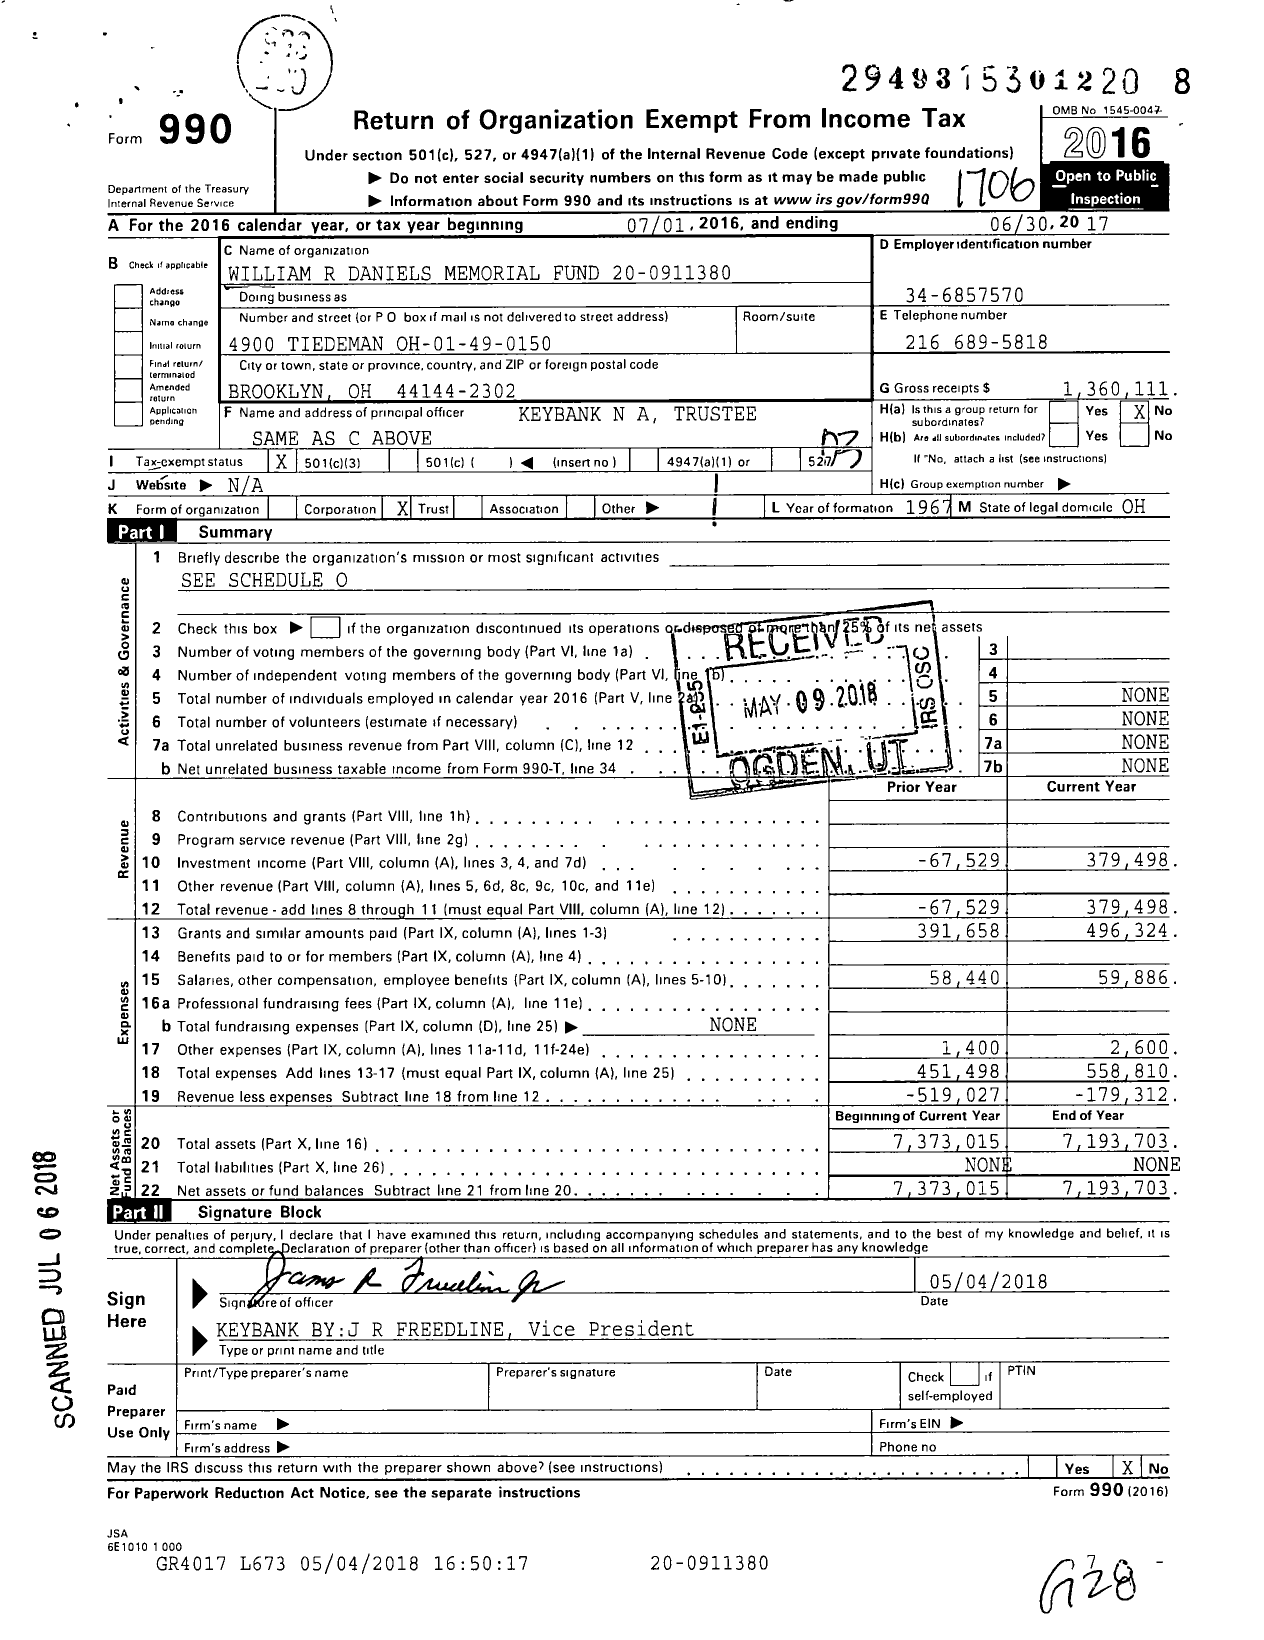 Image of first page of 2016 Form 990 for William R Daniels Memorial Fund